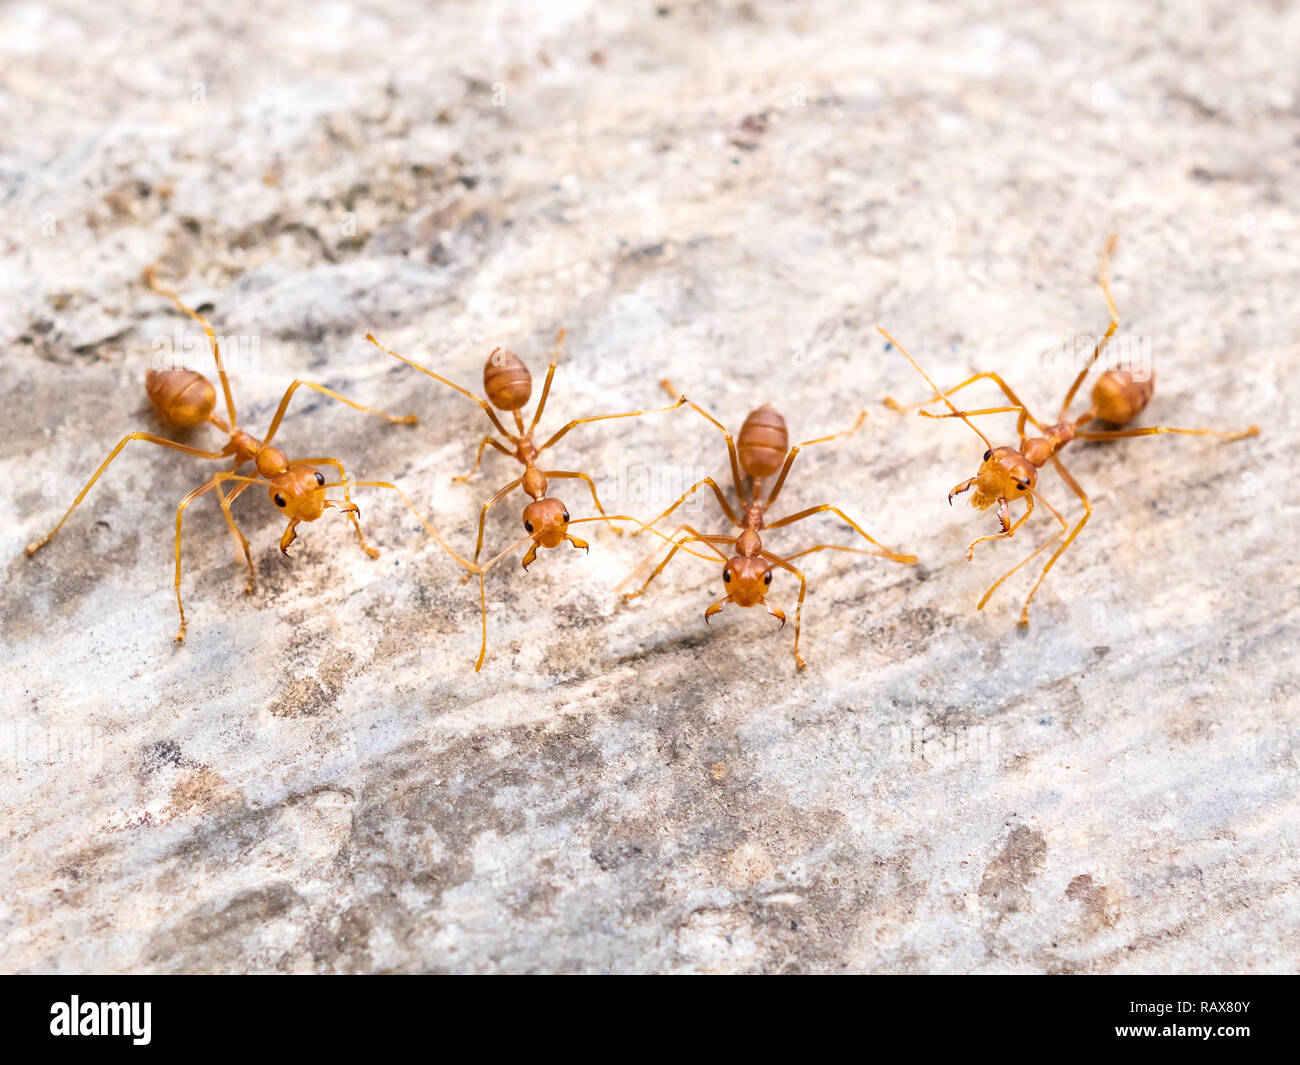 Top view and close-up image of red ants group (Oecophylla smaragdina F.) chasing to threat on cement floor Stock Photo